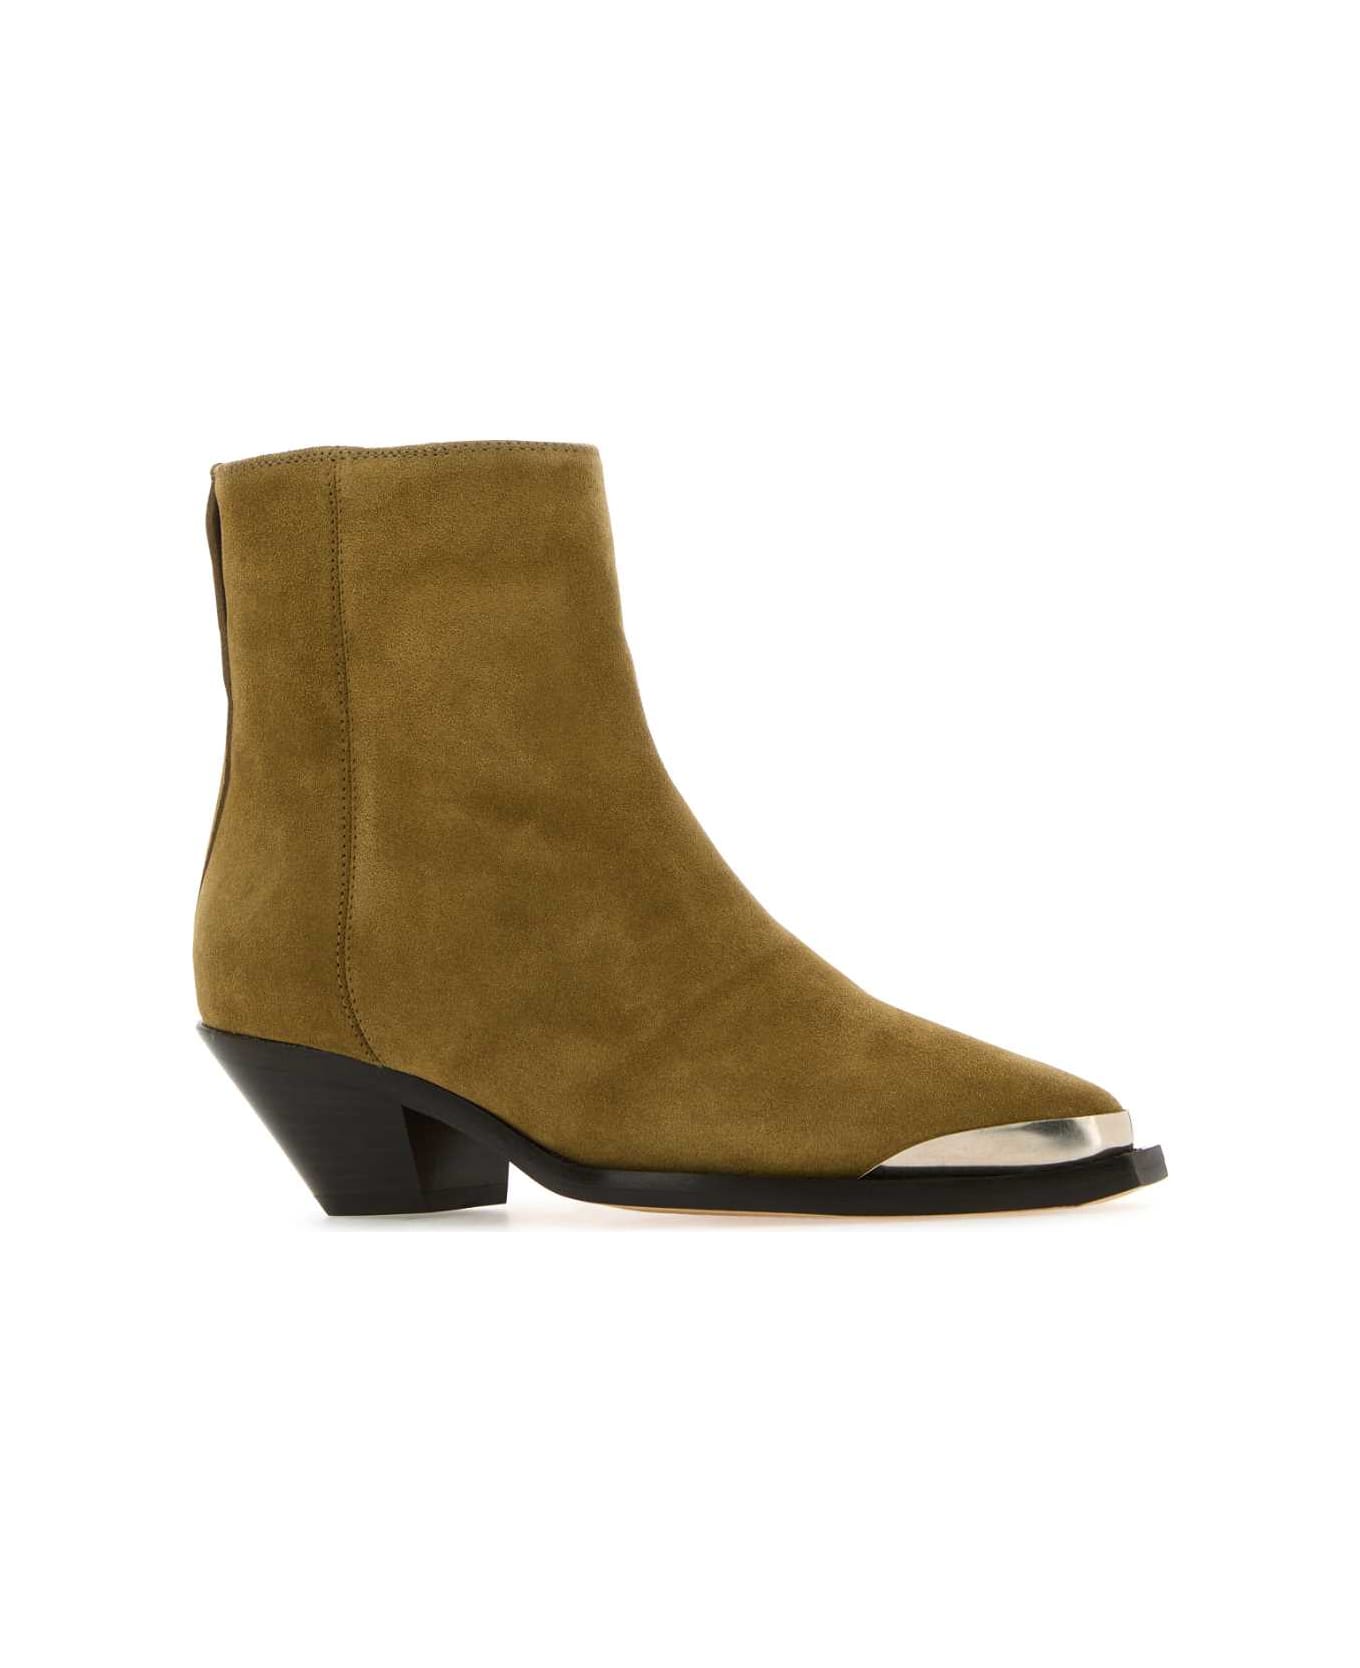 Isabel Marant Adnae Ankle Boots - TAUPE ブーツ